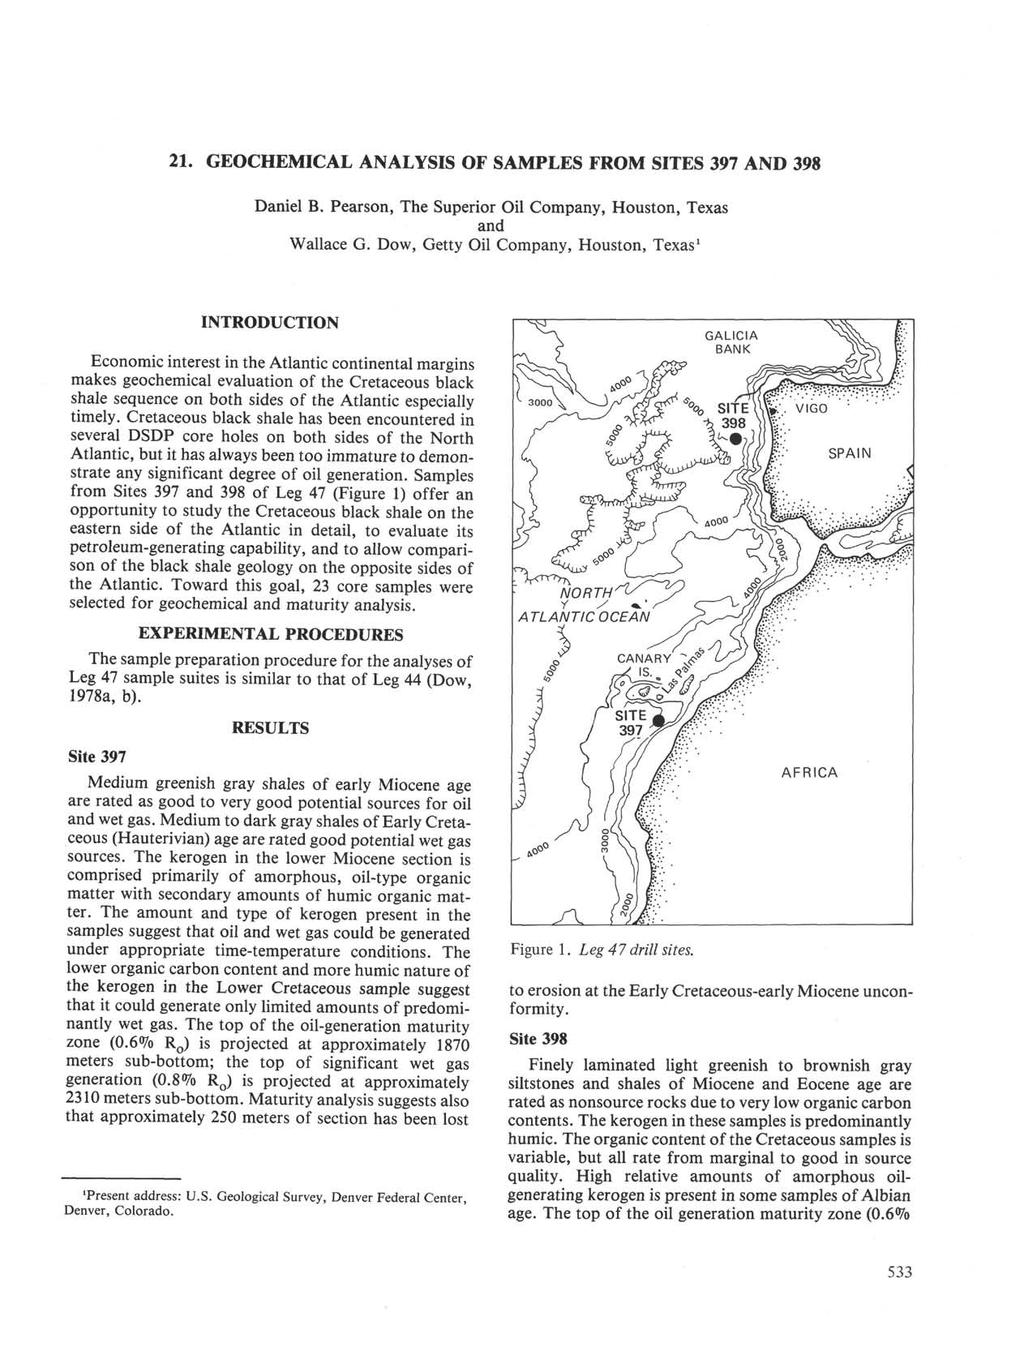 21. GEOCHEMICAL ANALYSIS OF SAMPLES FROM SITES 397 AND 398 Daniel B. Pearson, The Superior Company, Houston, Texas and Wallace G.